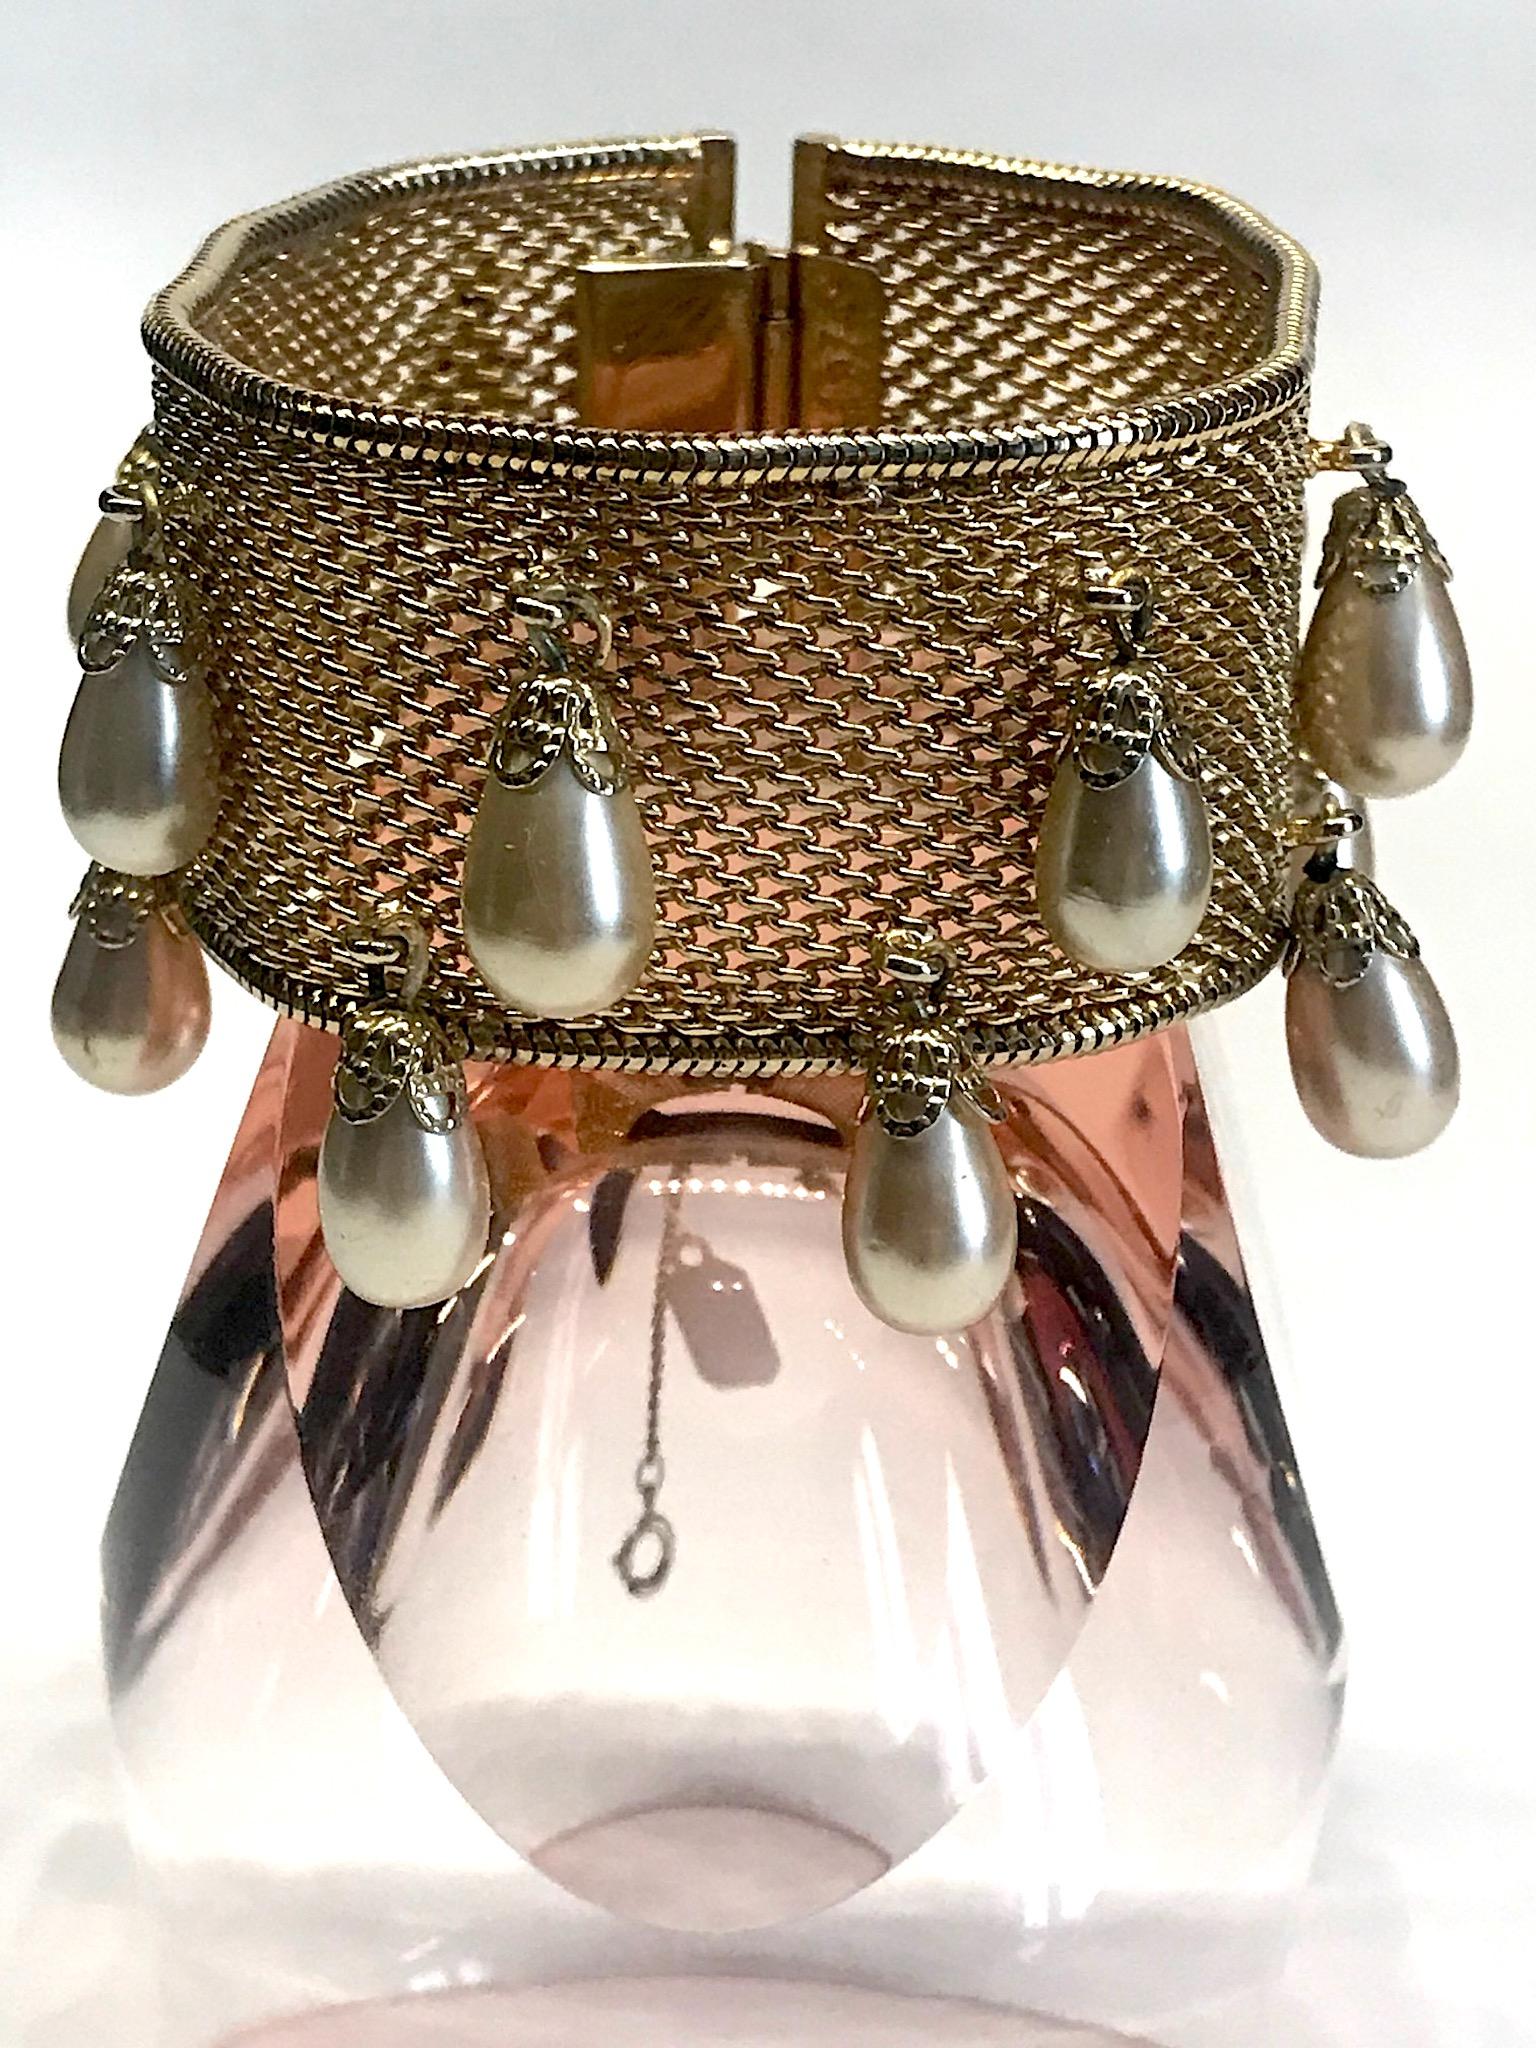 A wonderful vintage Hobe' woven mesh bracelet with pear dangles from the 1950s. The woven band is bordered on both sides with a snake link finish. There are 14 creamy champagne color and pear shape faux pearl bead dangles. Each pearl is set into a